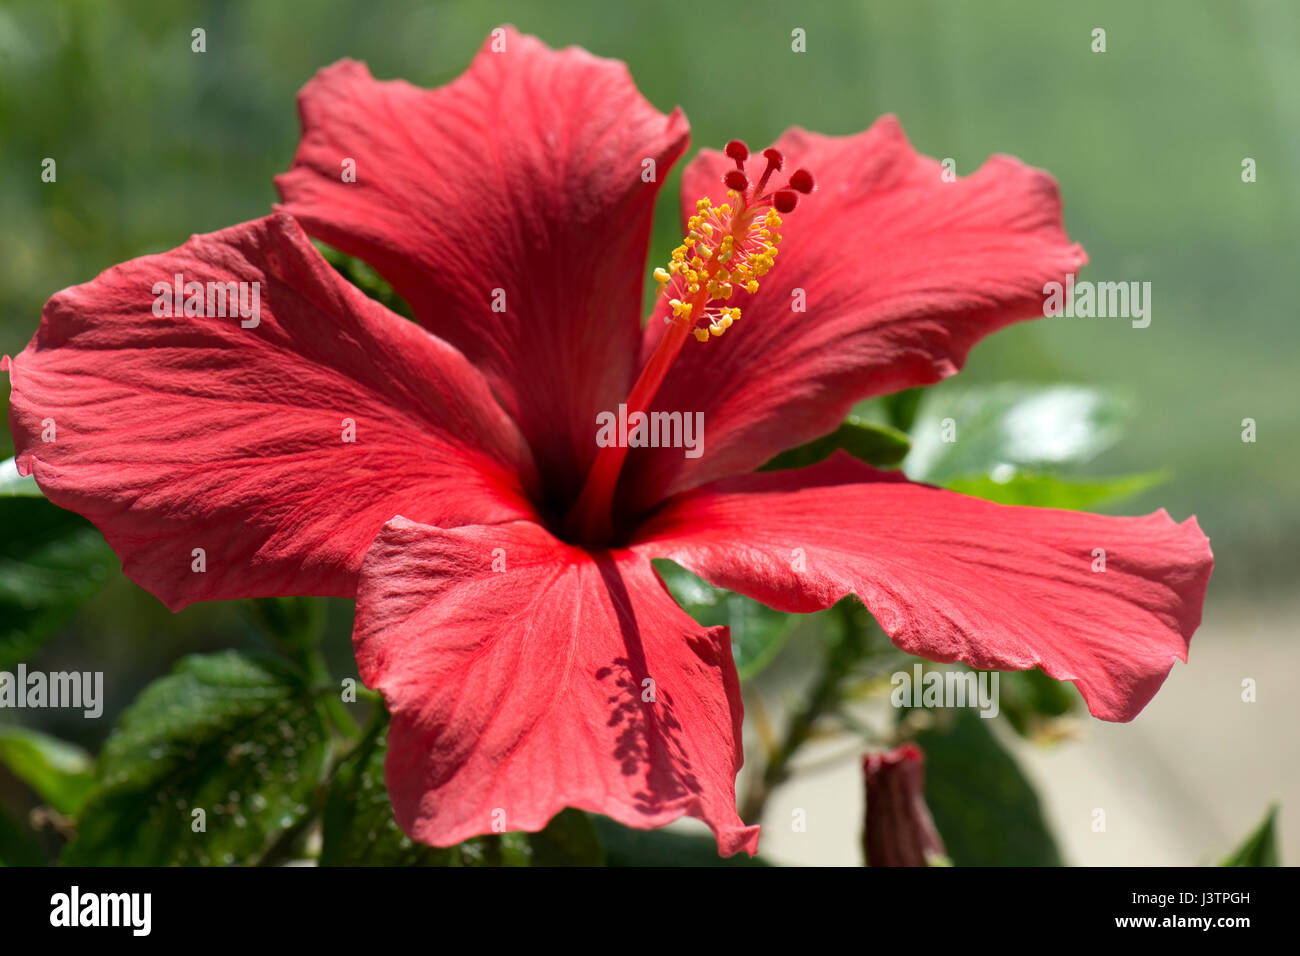 Red flower of Hibiscus rosa-sinensis or rose mallow with open petals and pronounced pistil supporrting styles, stigma and filaments with anthers Stock Photo